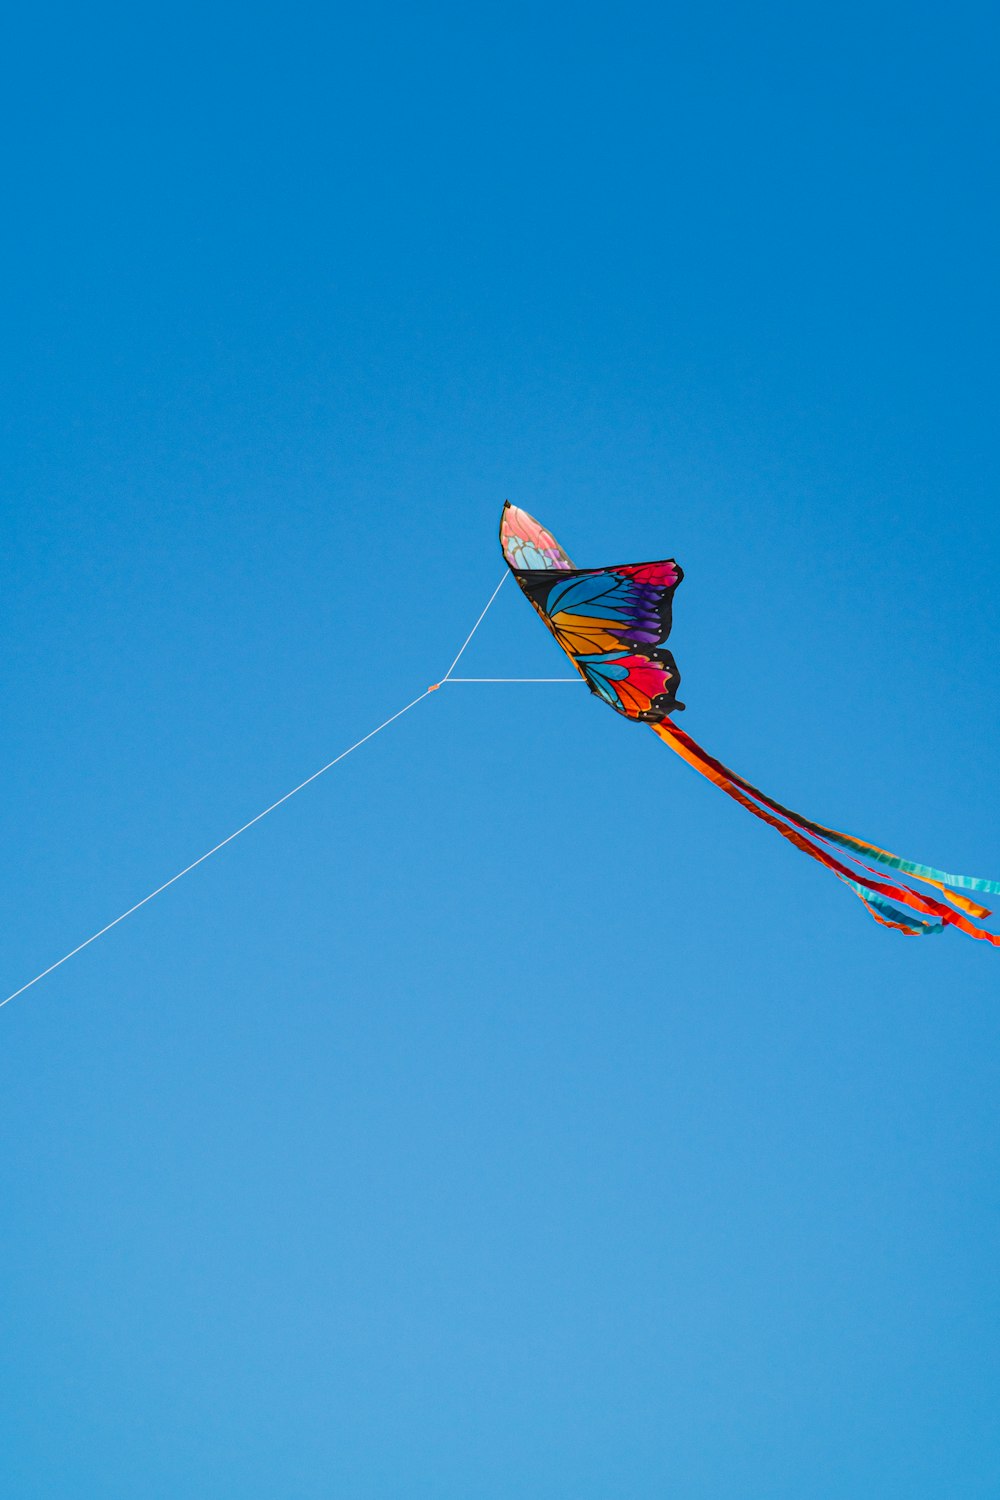 red and yellow kite flying under blue sky during daytime